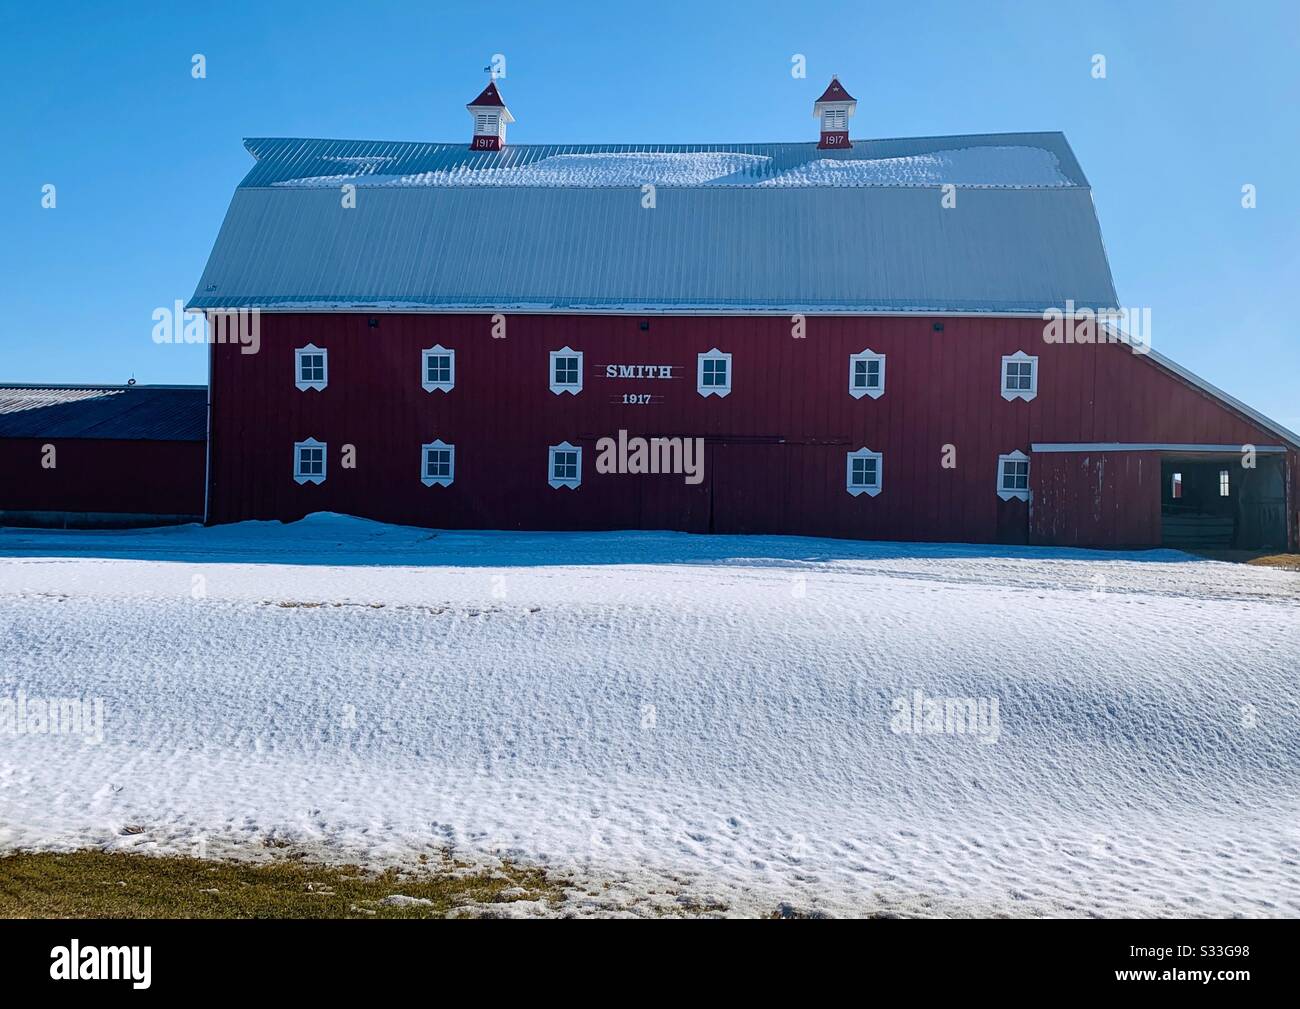 DUBUQUE, IOWA, 02/23/20–Landscape scenic photo of beautiful red barn with white framed windows with snow covered roof under a bright blue sky on a sunny day. Stock Photo